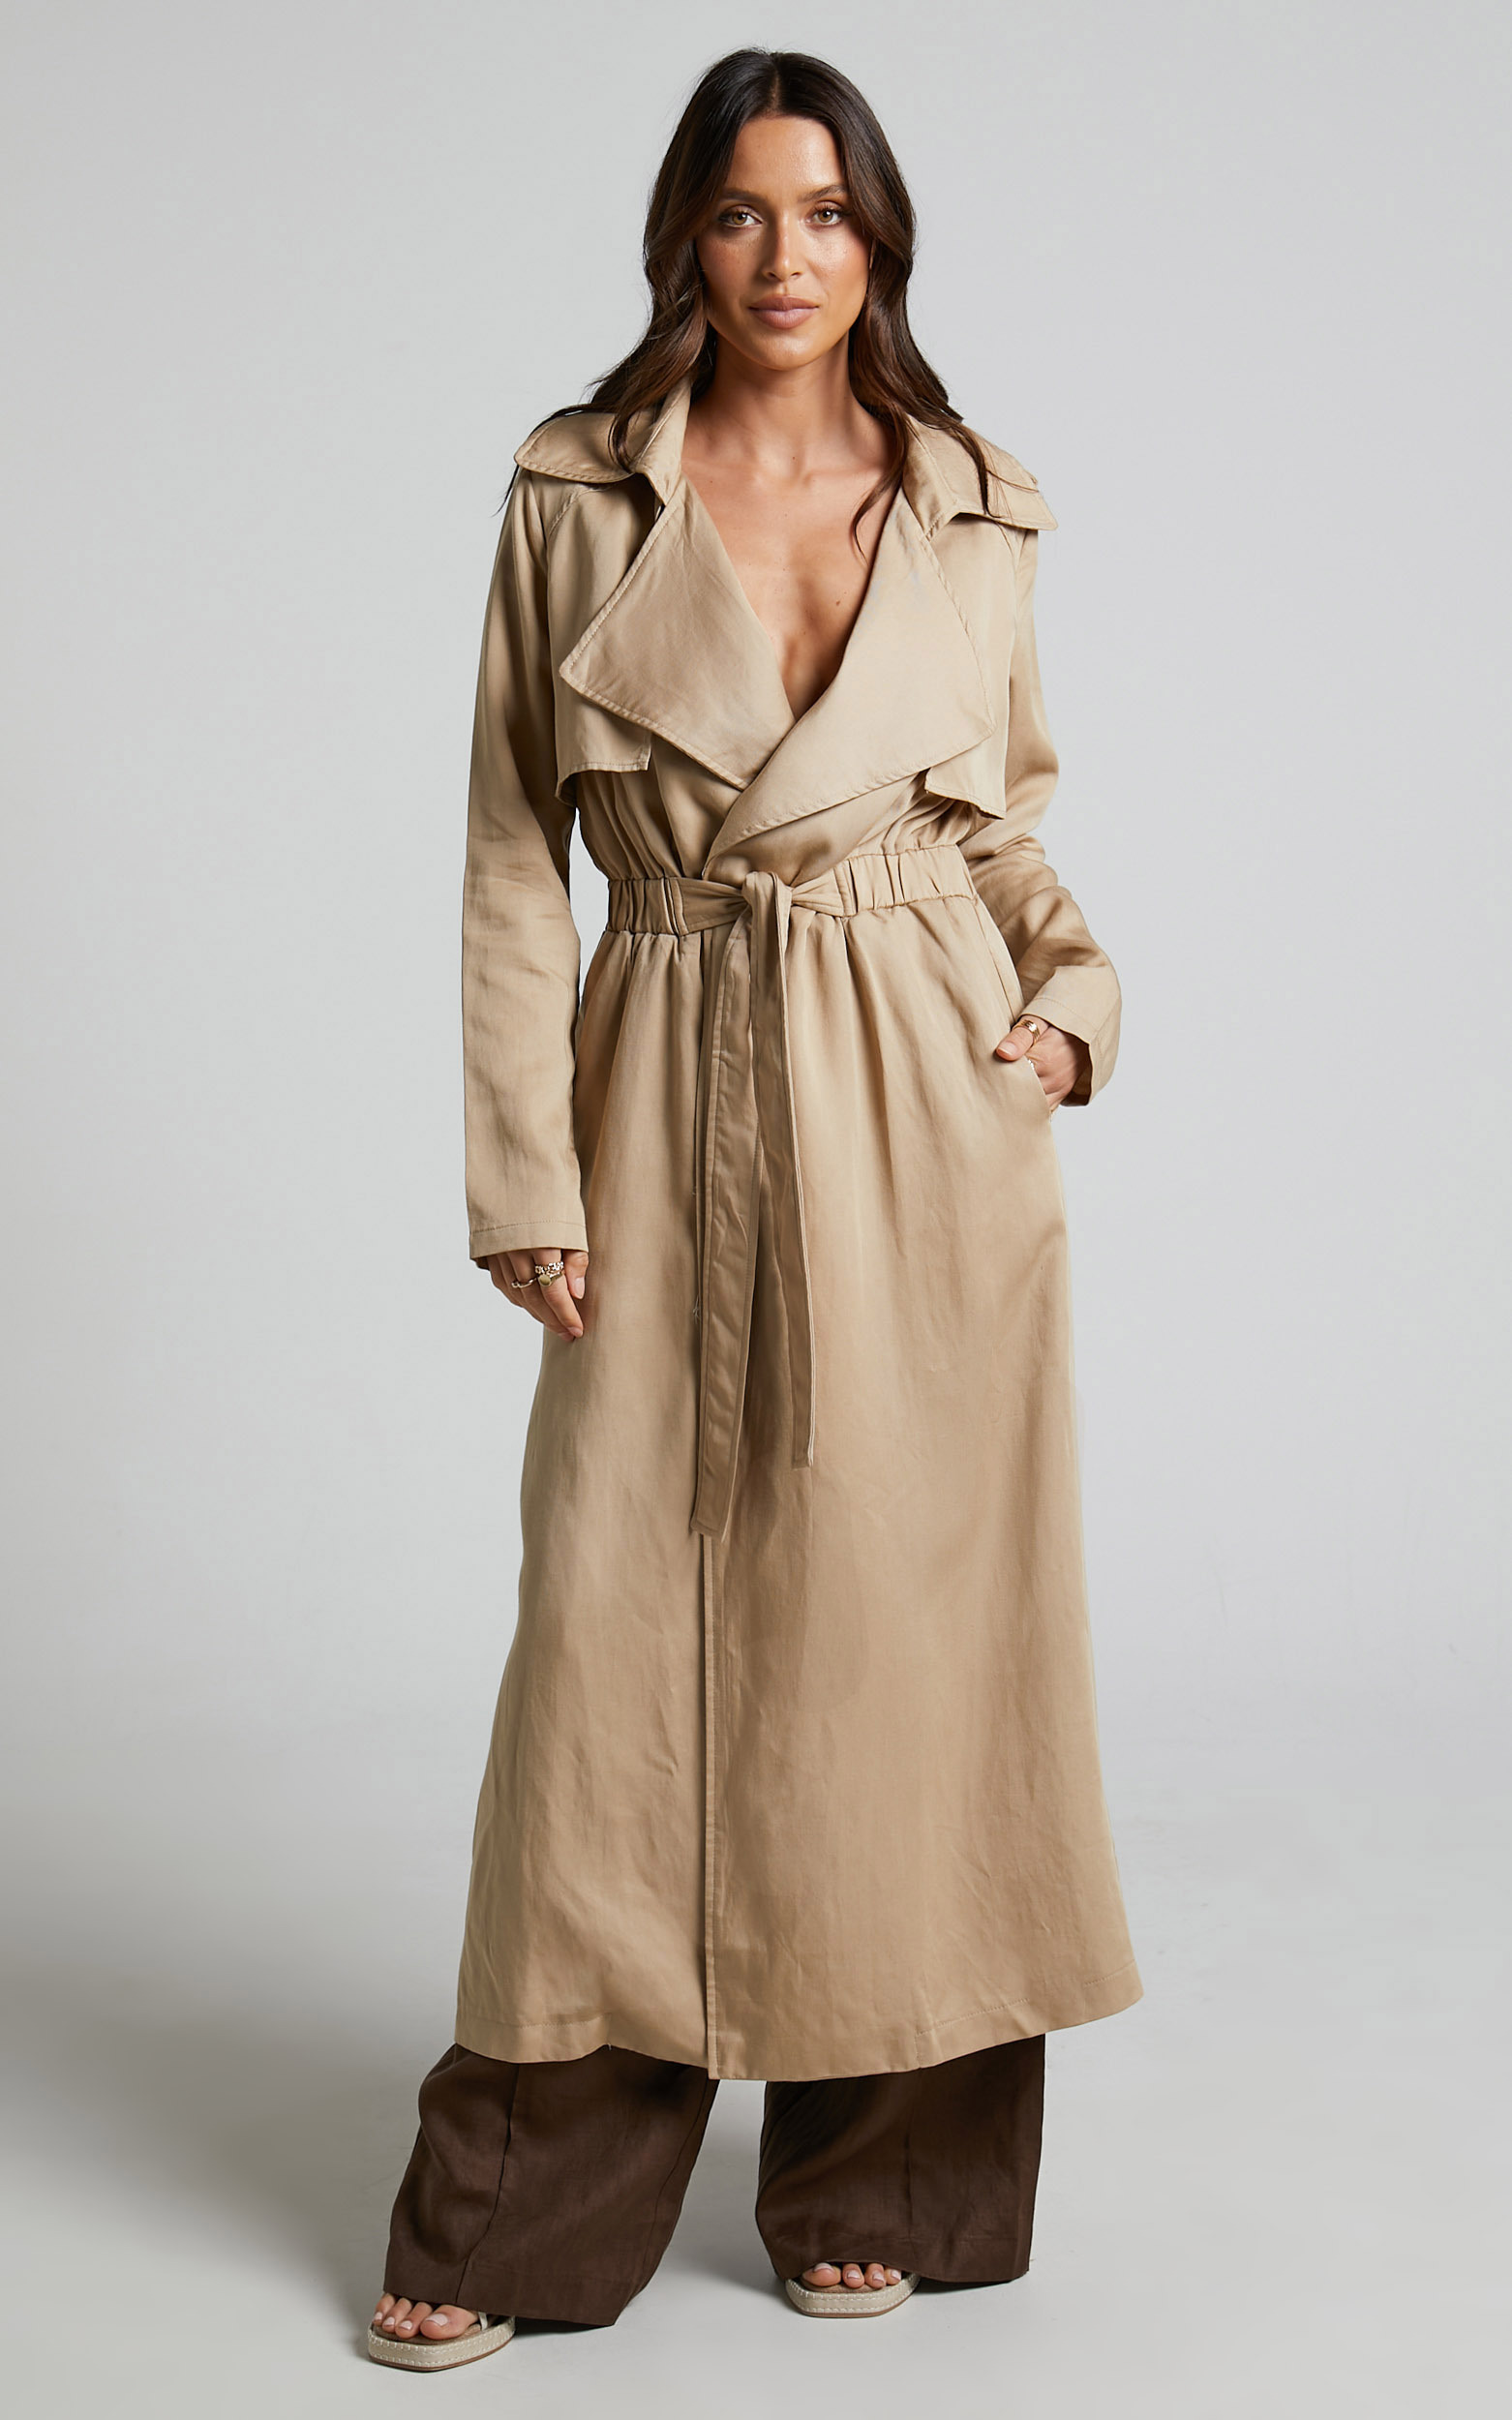 Amalie The Label - Monimonie Trench Coat in Natural - 04, NEU1, hi-res image number null